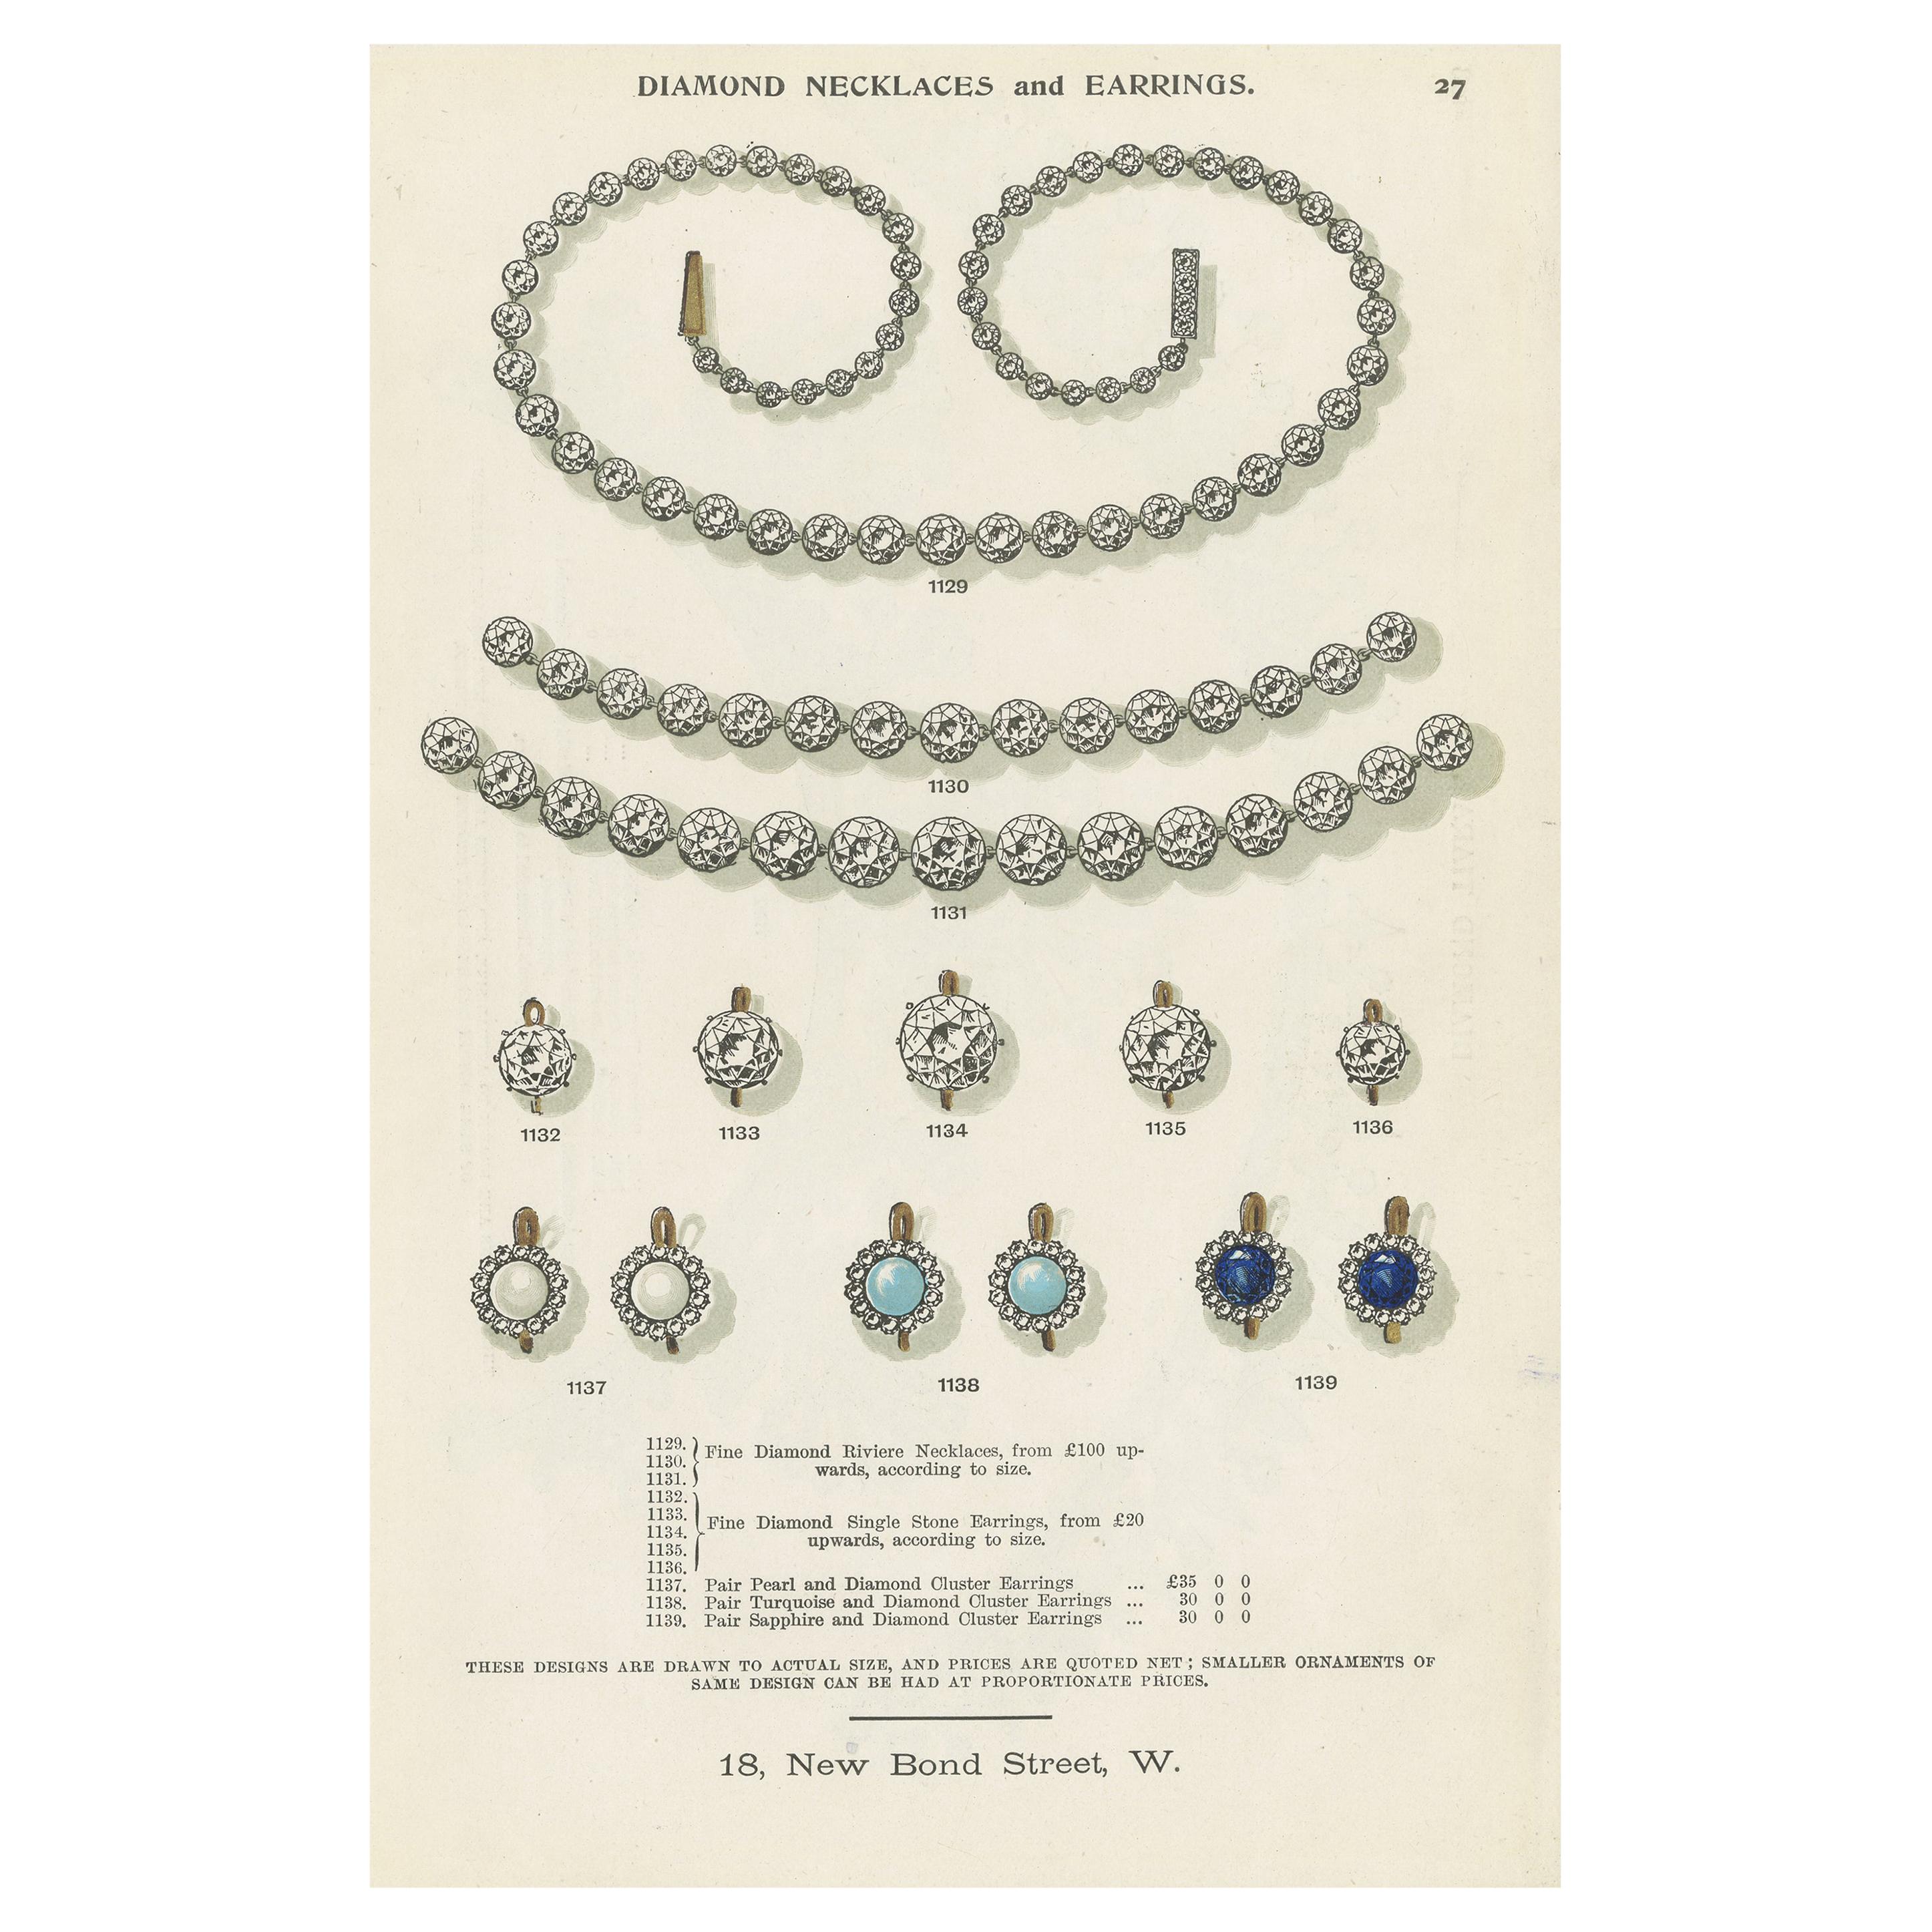 Antique Print of Diamond Necklaces and Earrings by Streeter '1898'